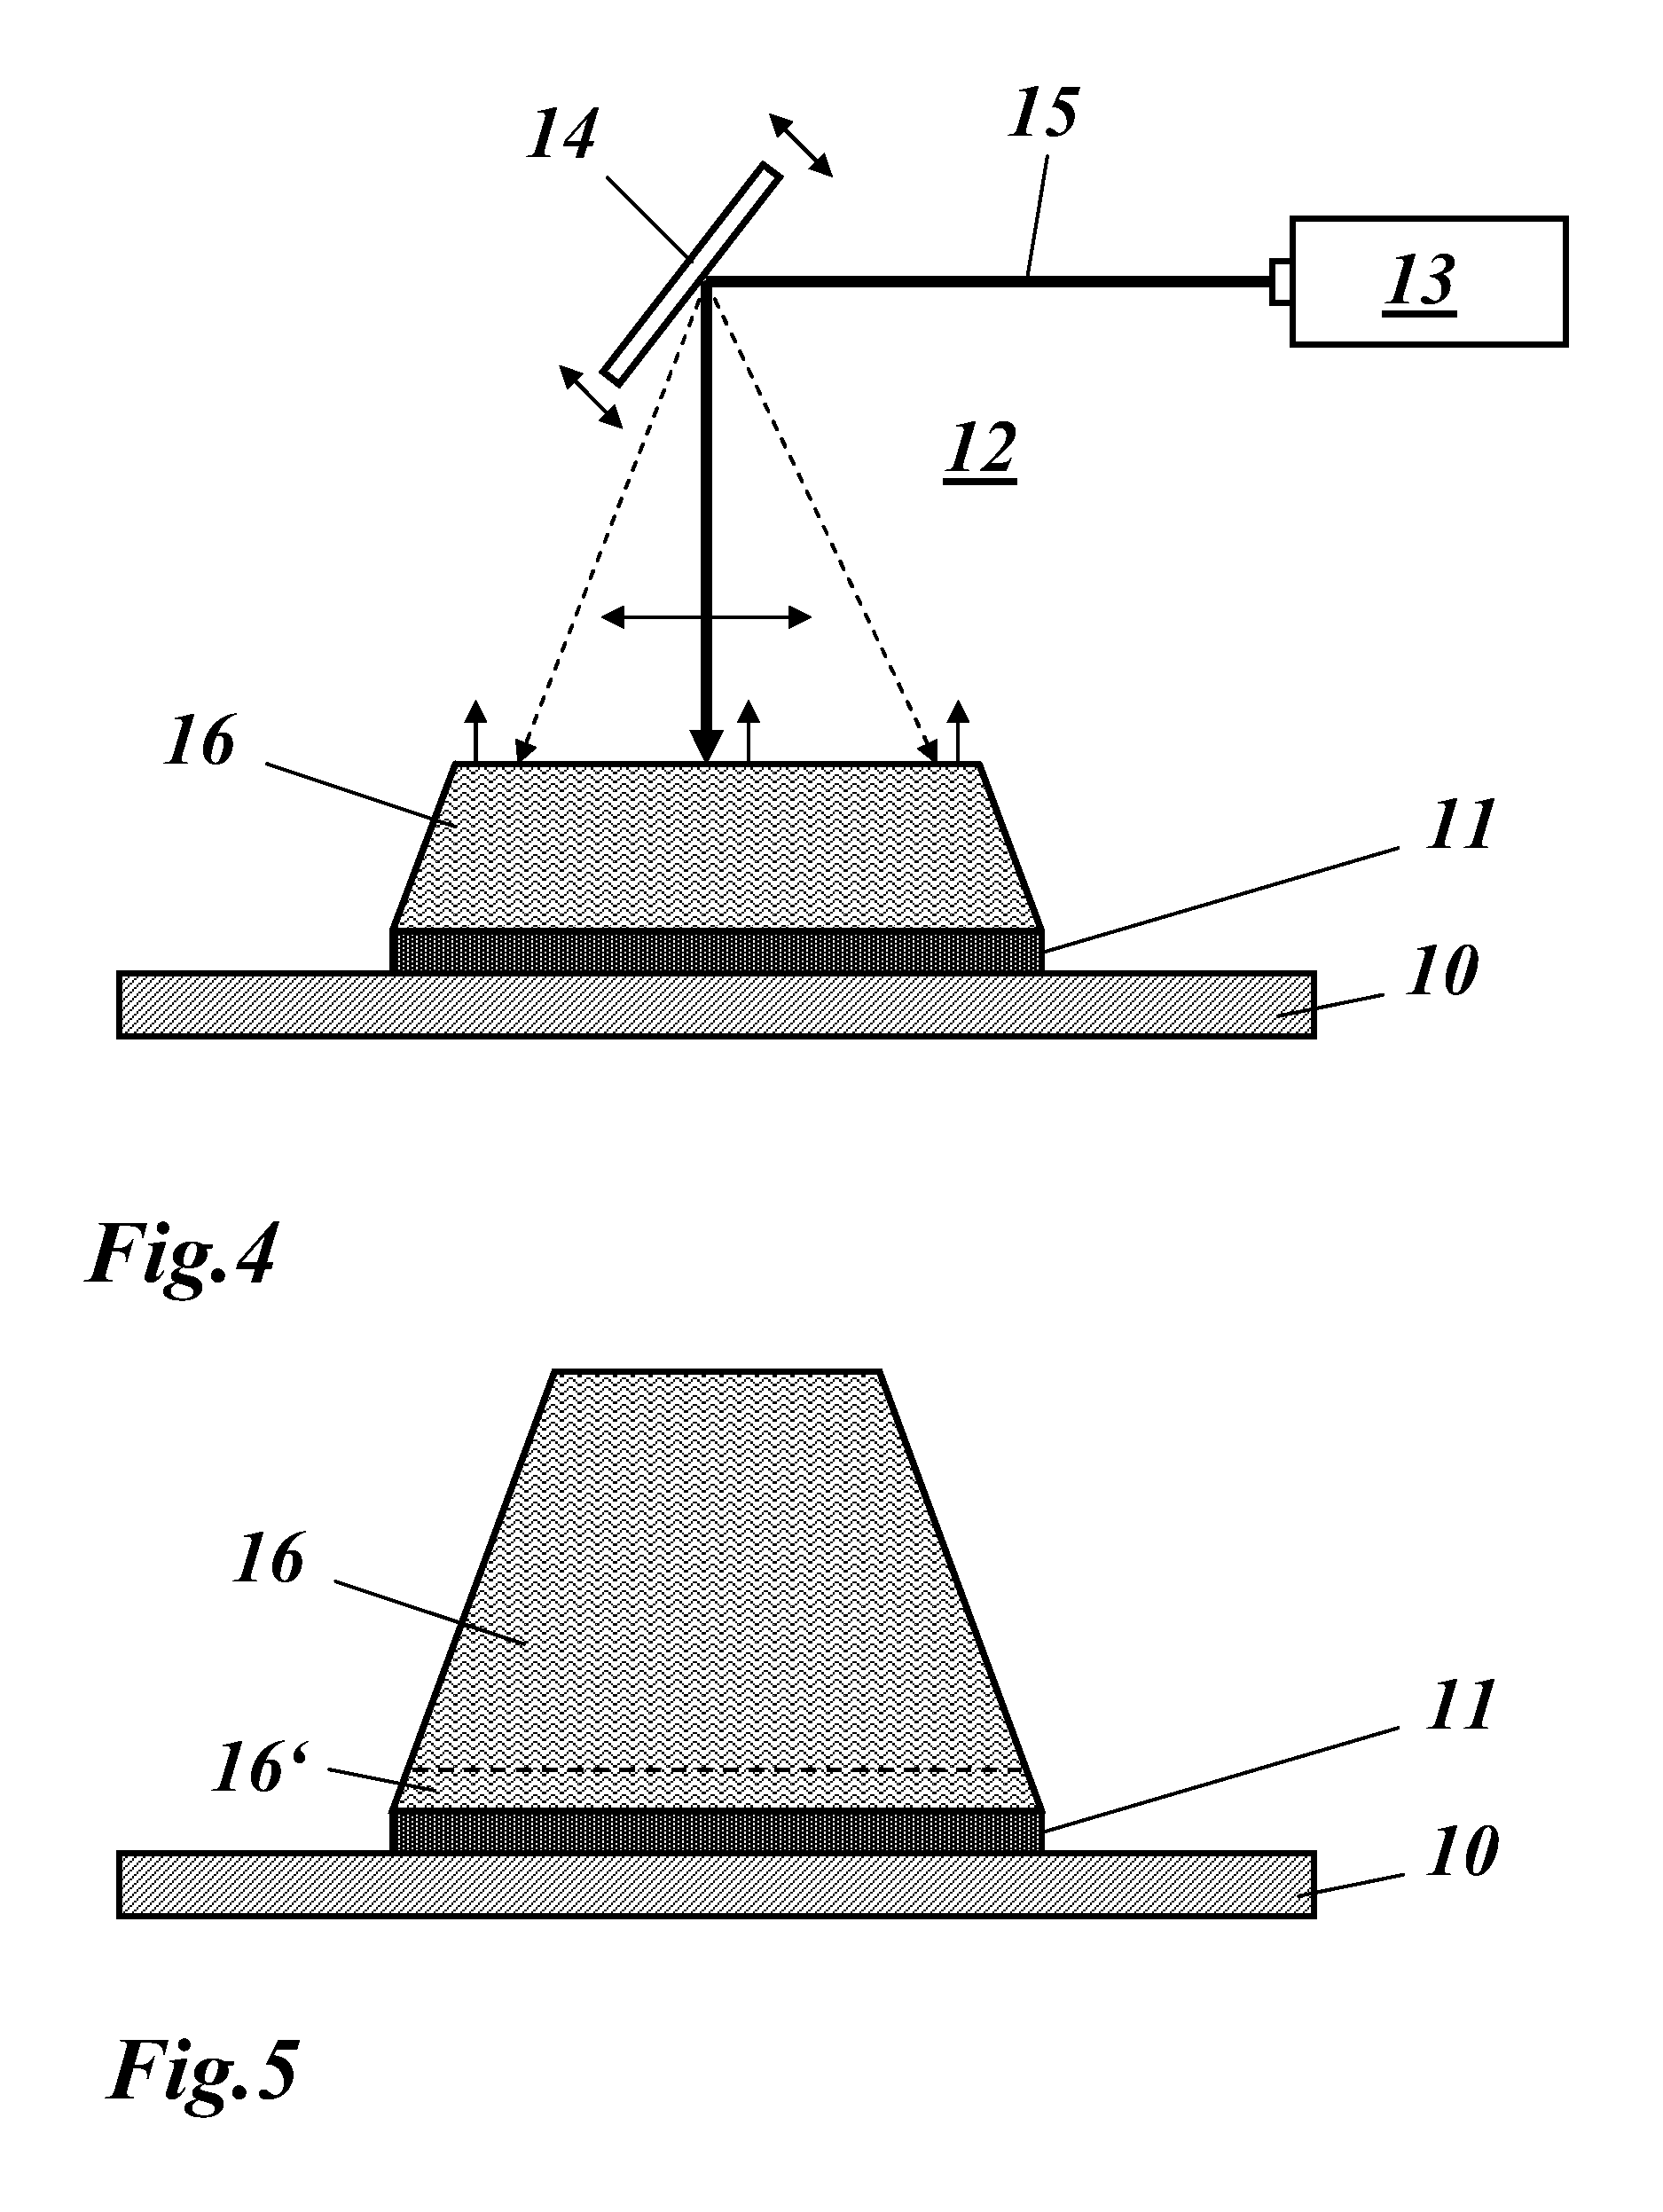 Process for producing a 3-dimensional component by selective laser melting (SLM)